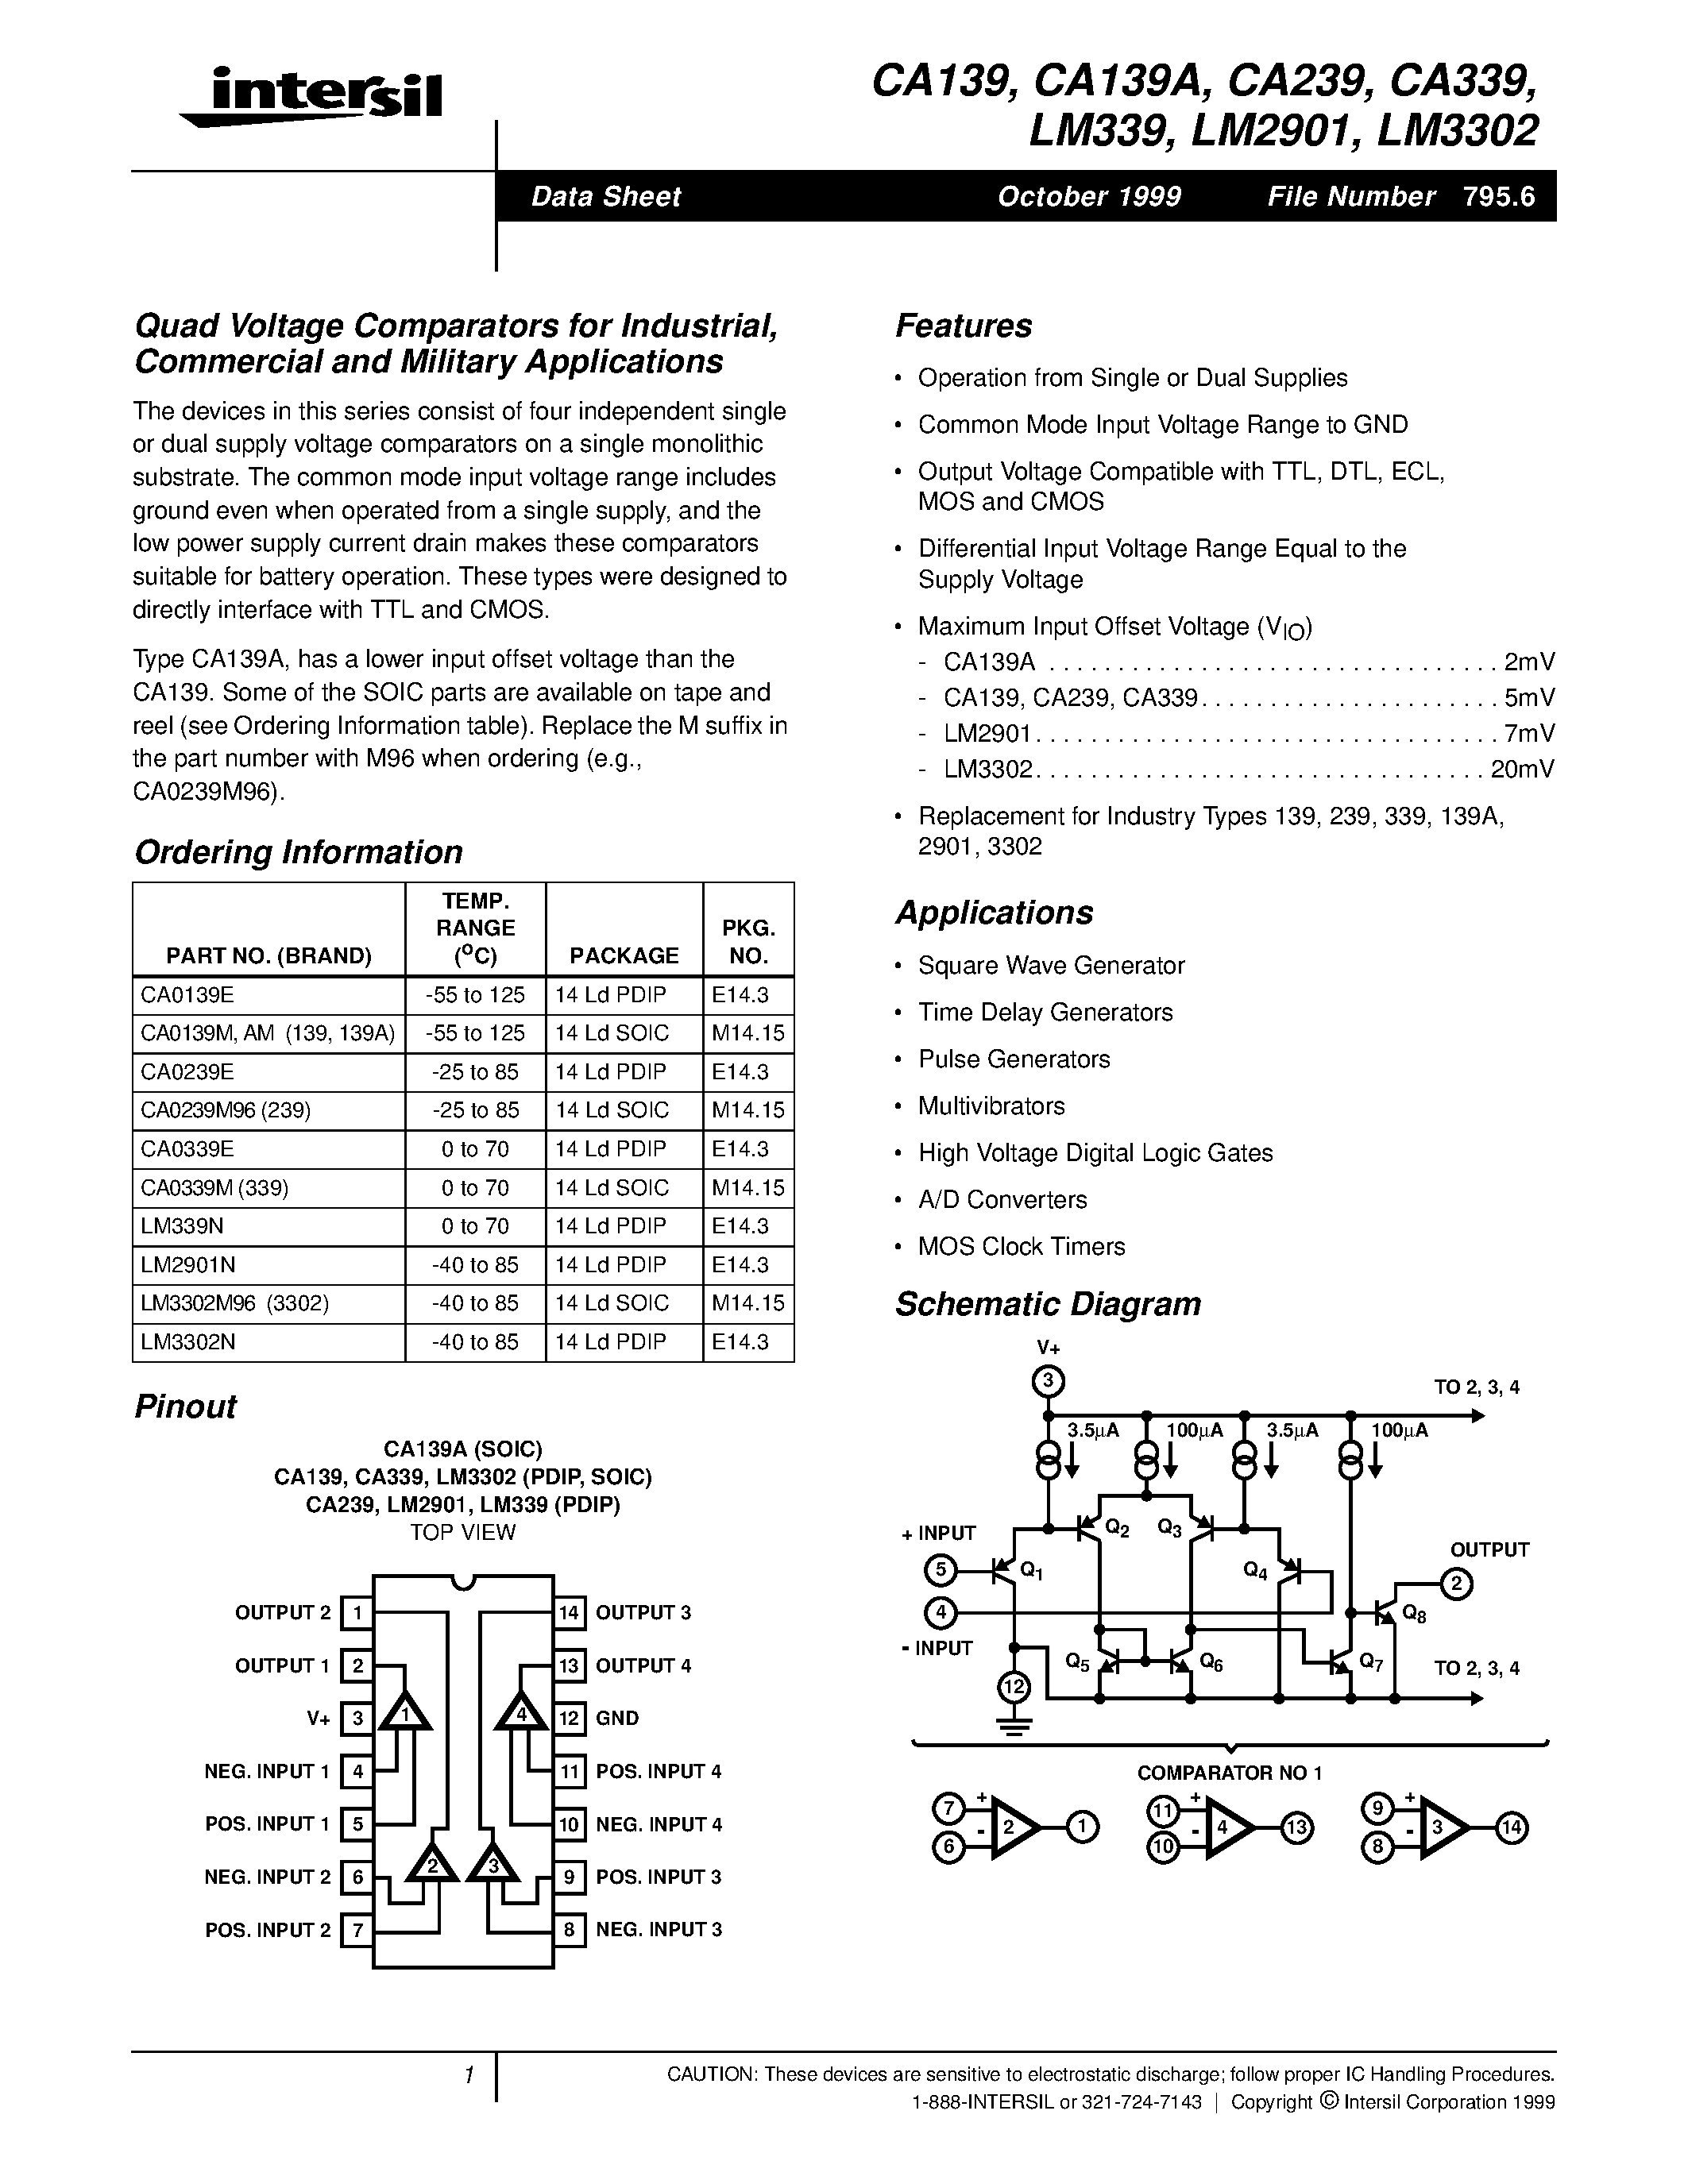 Datasheet CA139 - Quad Voltage Comparators for Industrial / Commercial and Military Applications page 1